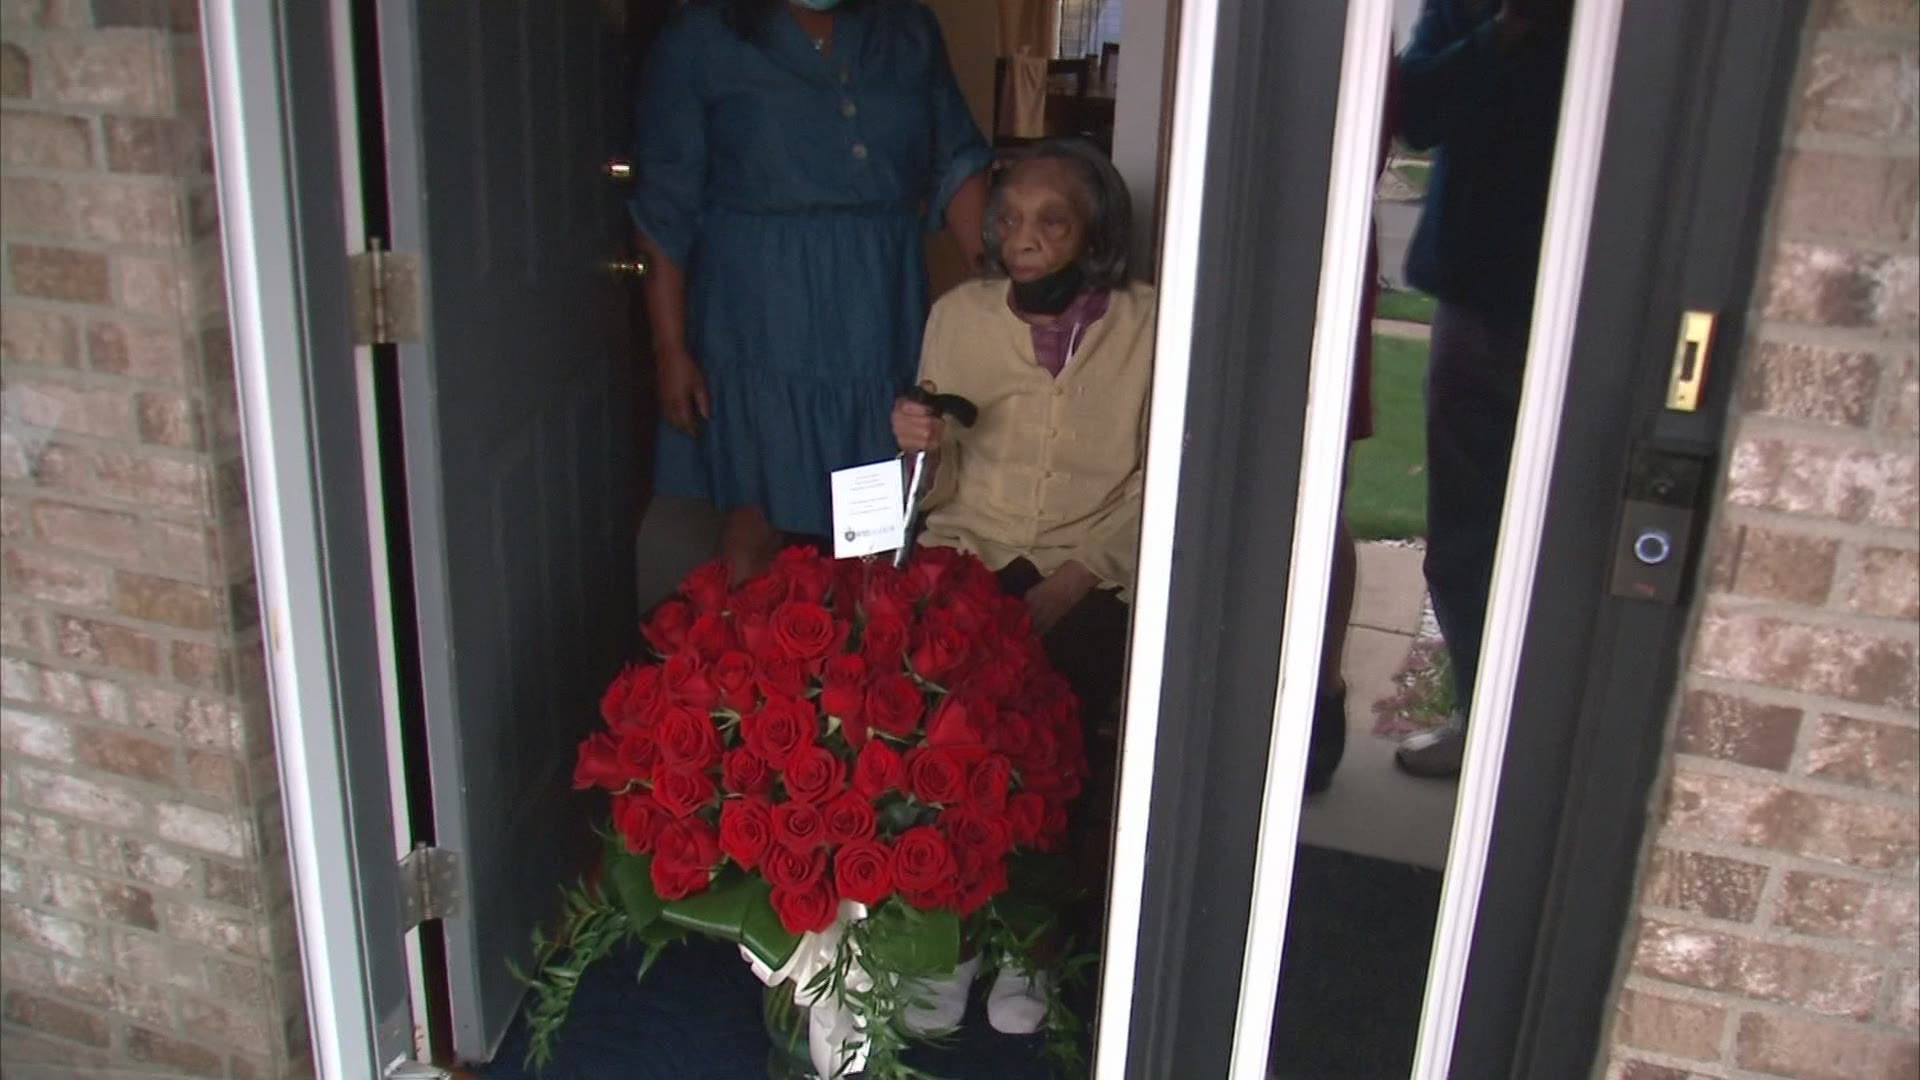 Elistine Lawson turned 107-years-old on Wednesday and got 107 roses from her church for her birthday.